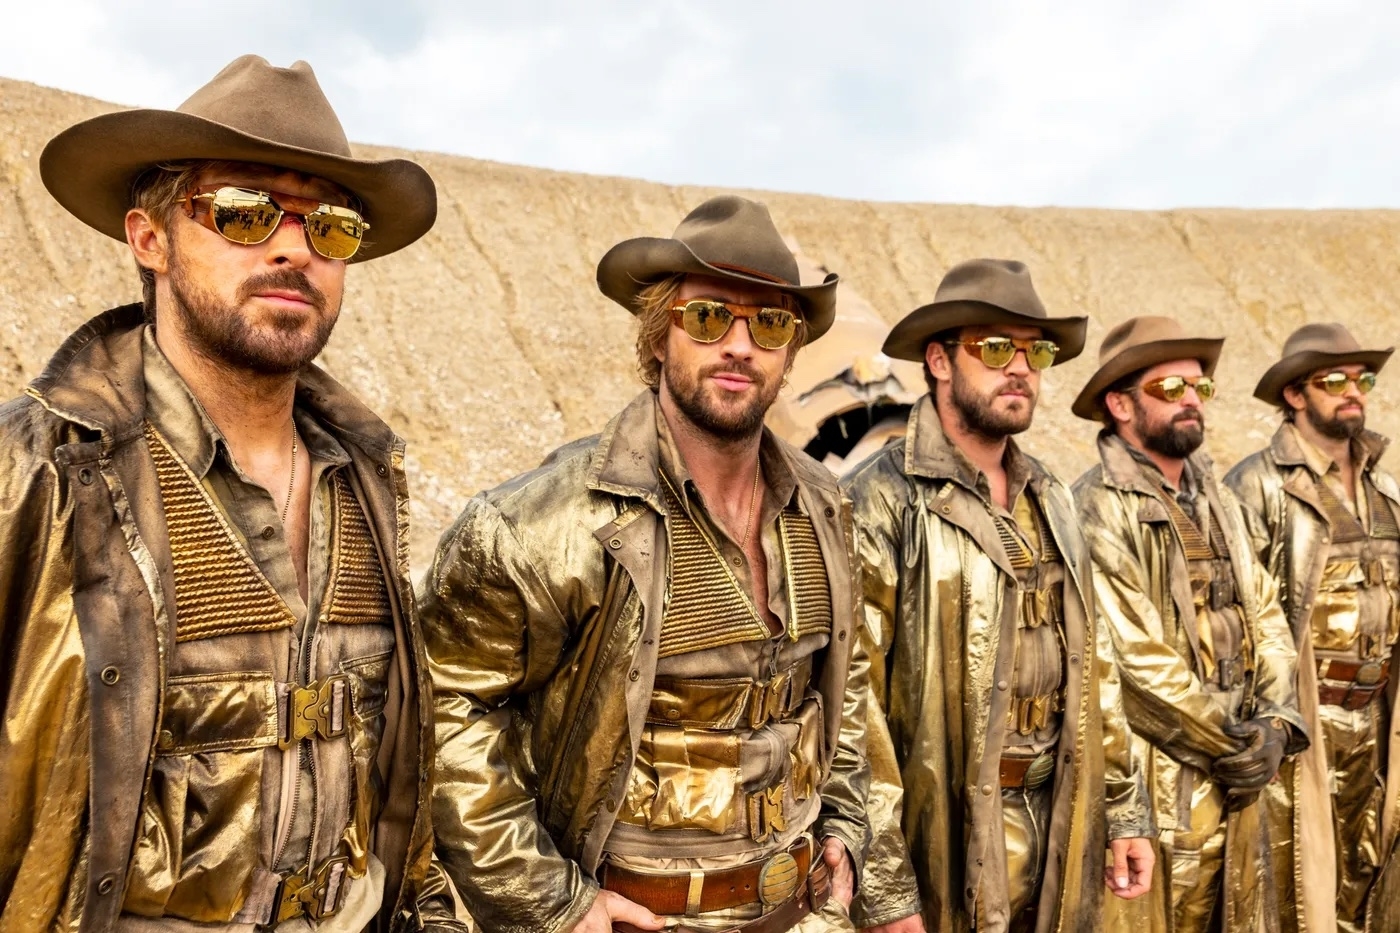 Five actors in cowboy outfits with shiny gold accents, wearing hats and sunglasses, posing with a desert backdrop